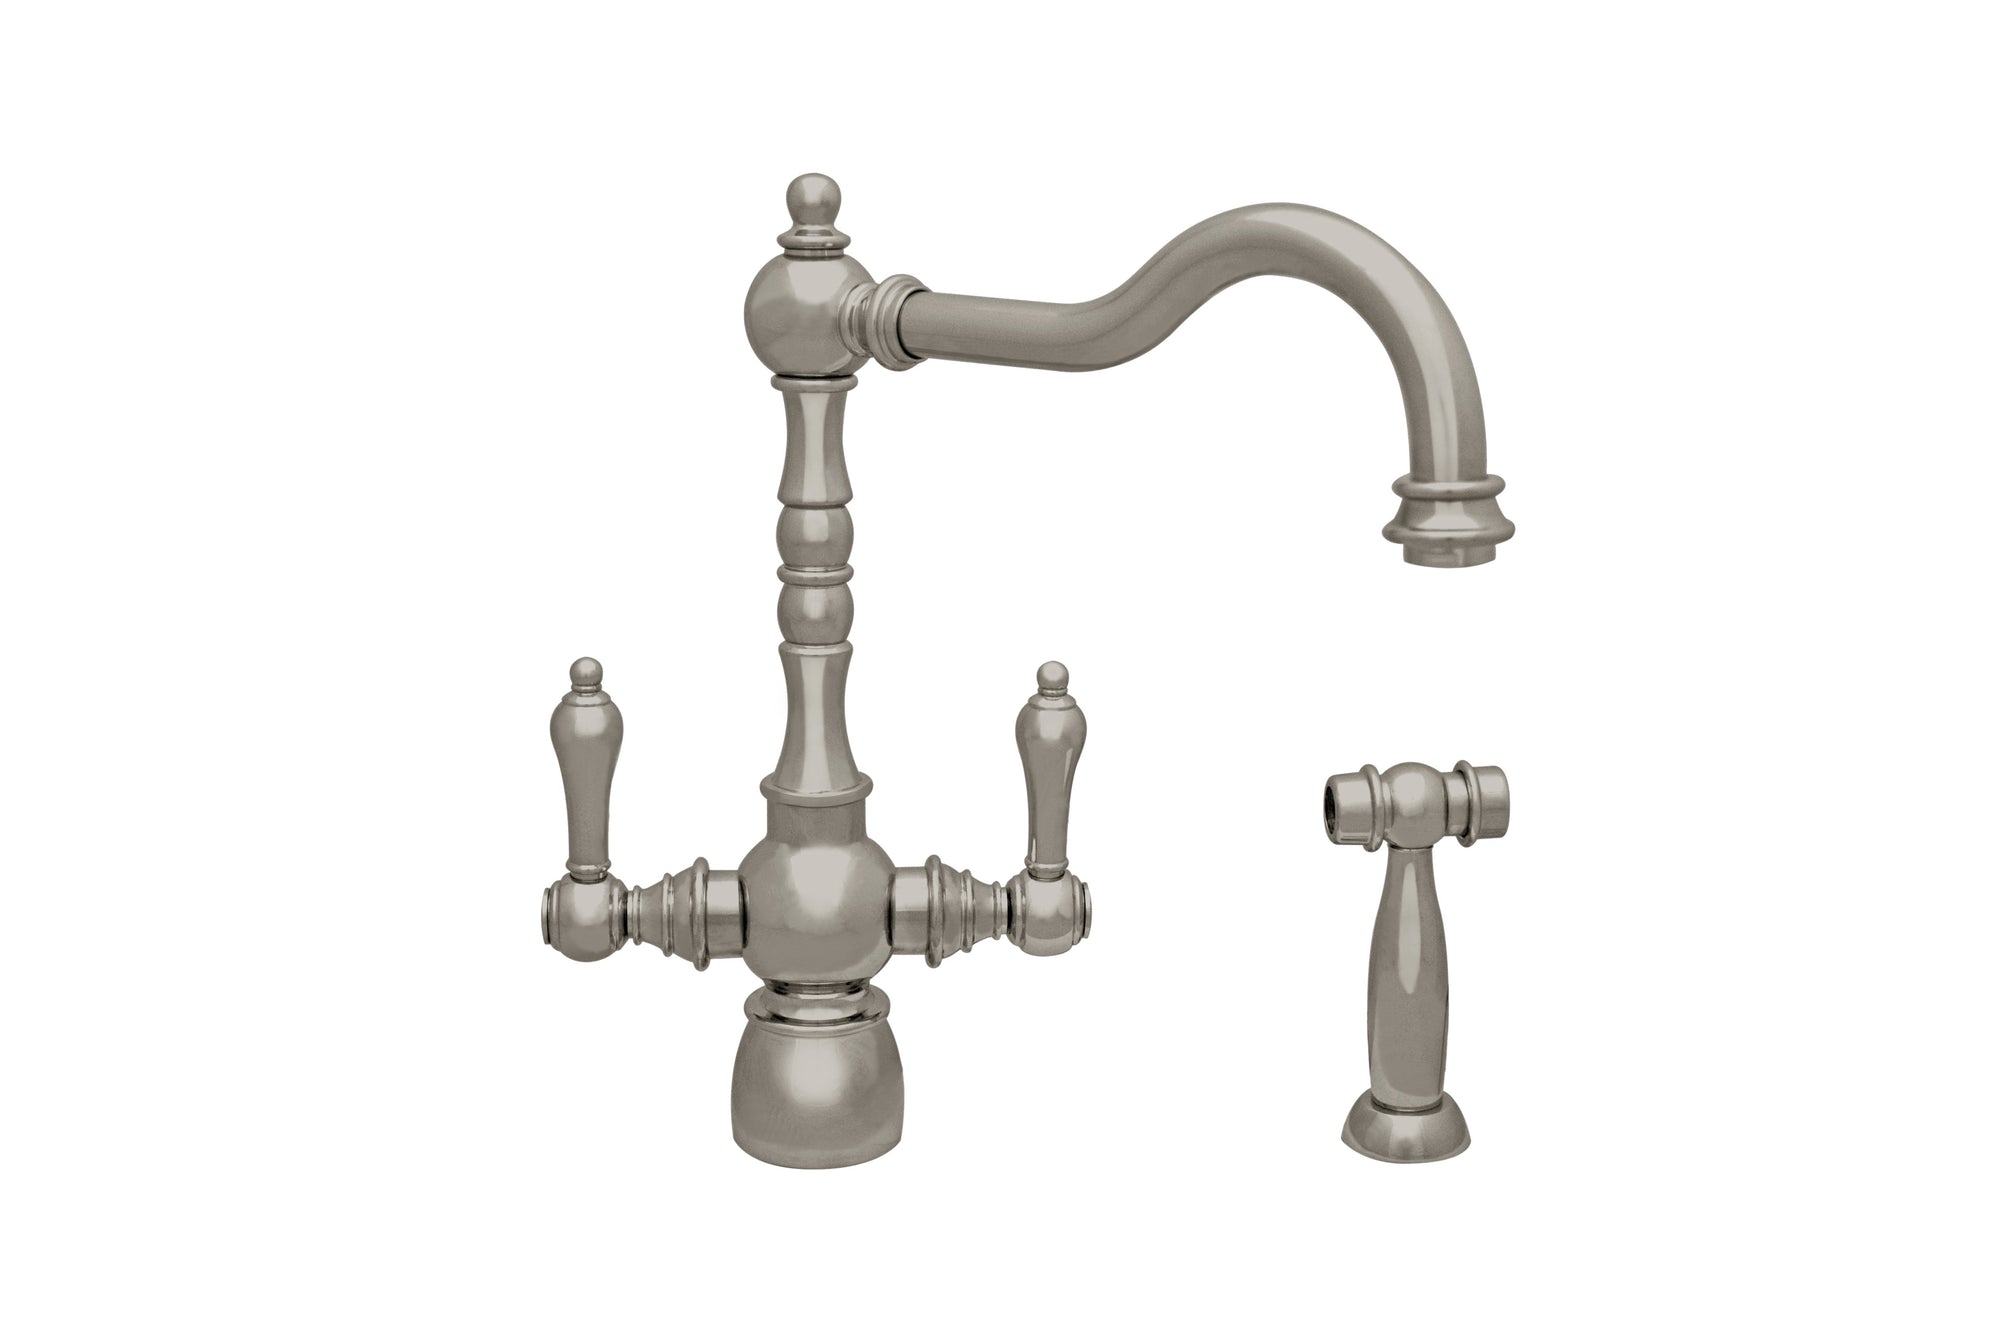 Englishhaus dual lever handle faucet with traditional swivel spout, solid lever handles and solid brass side spray